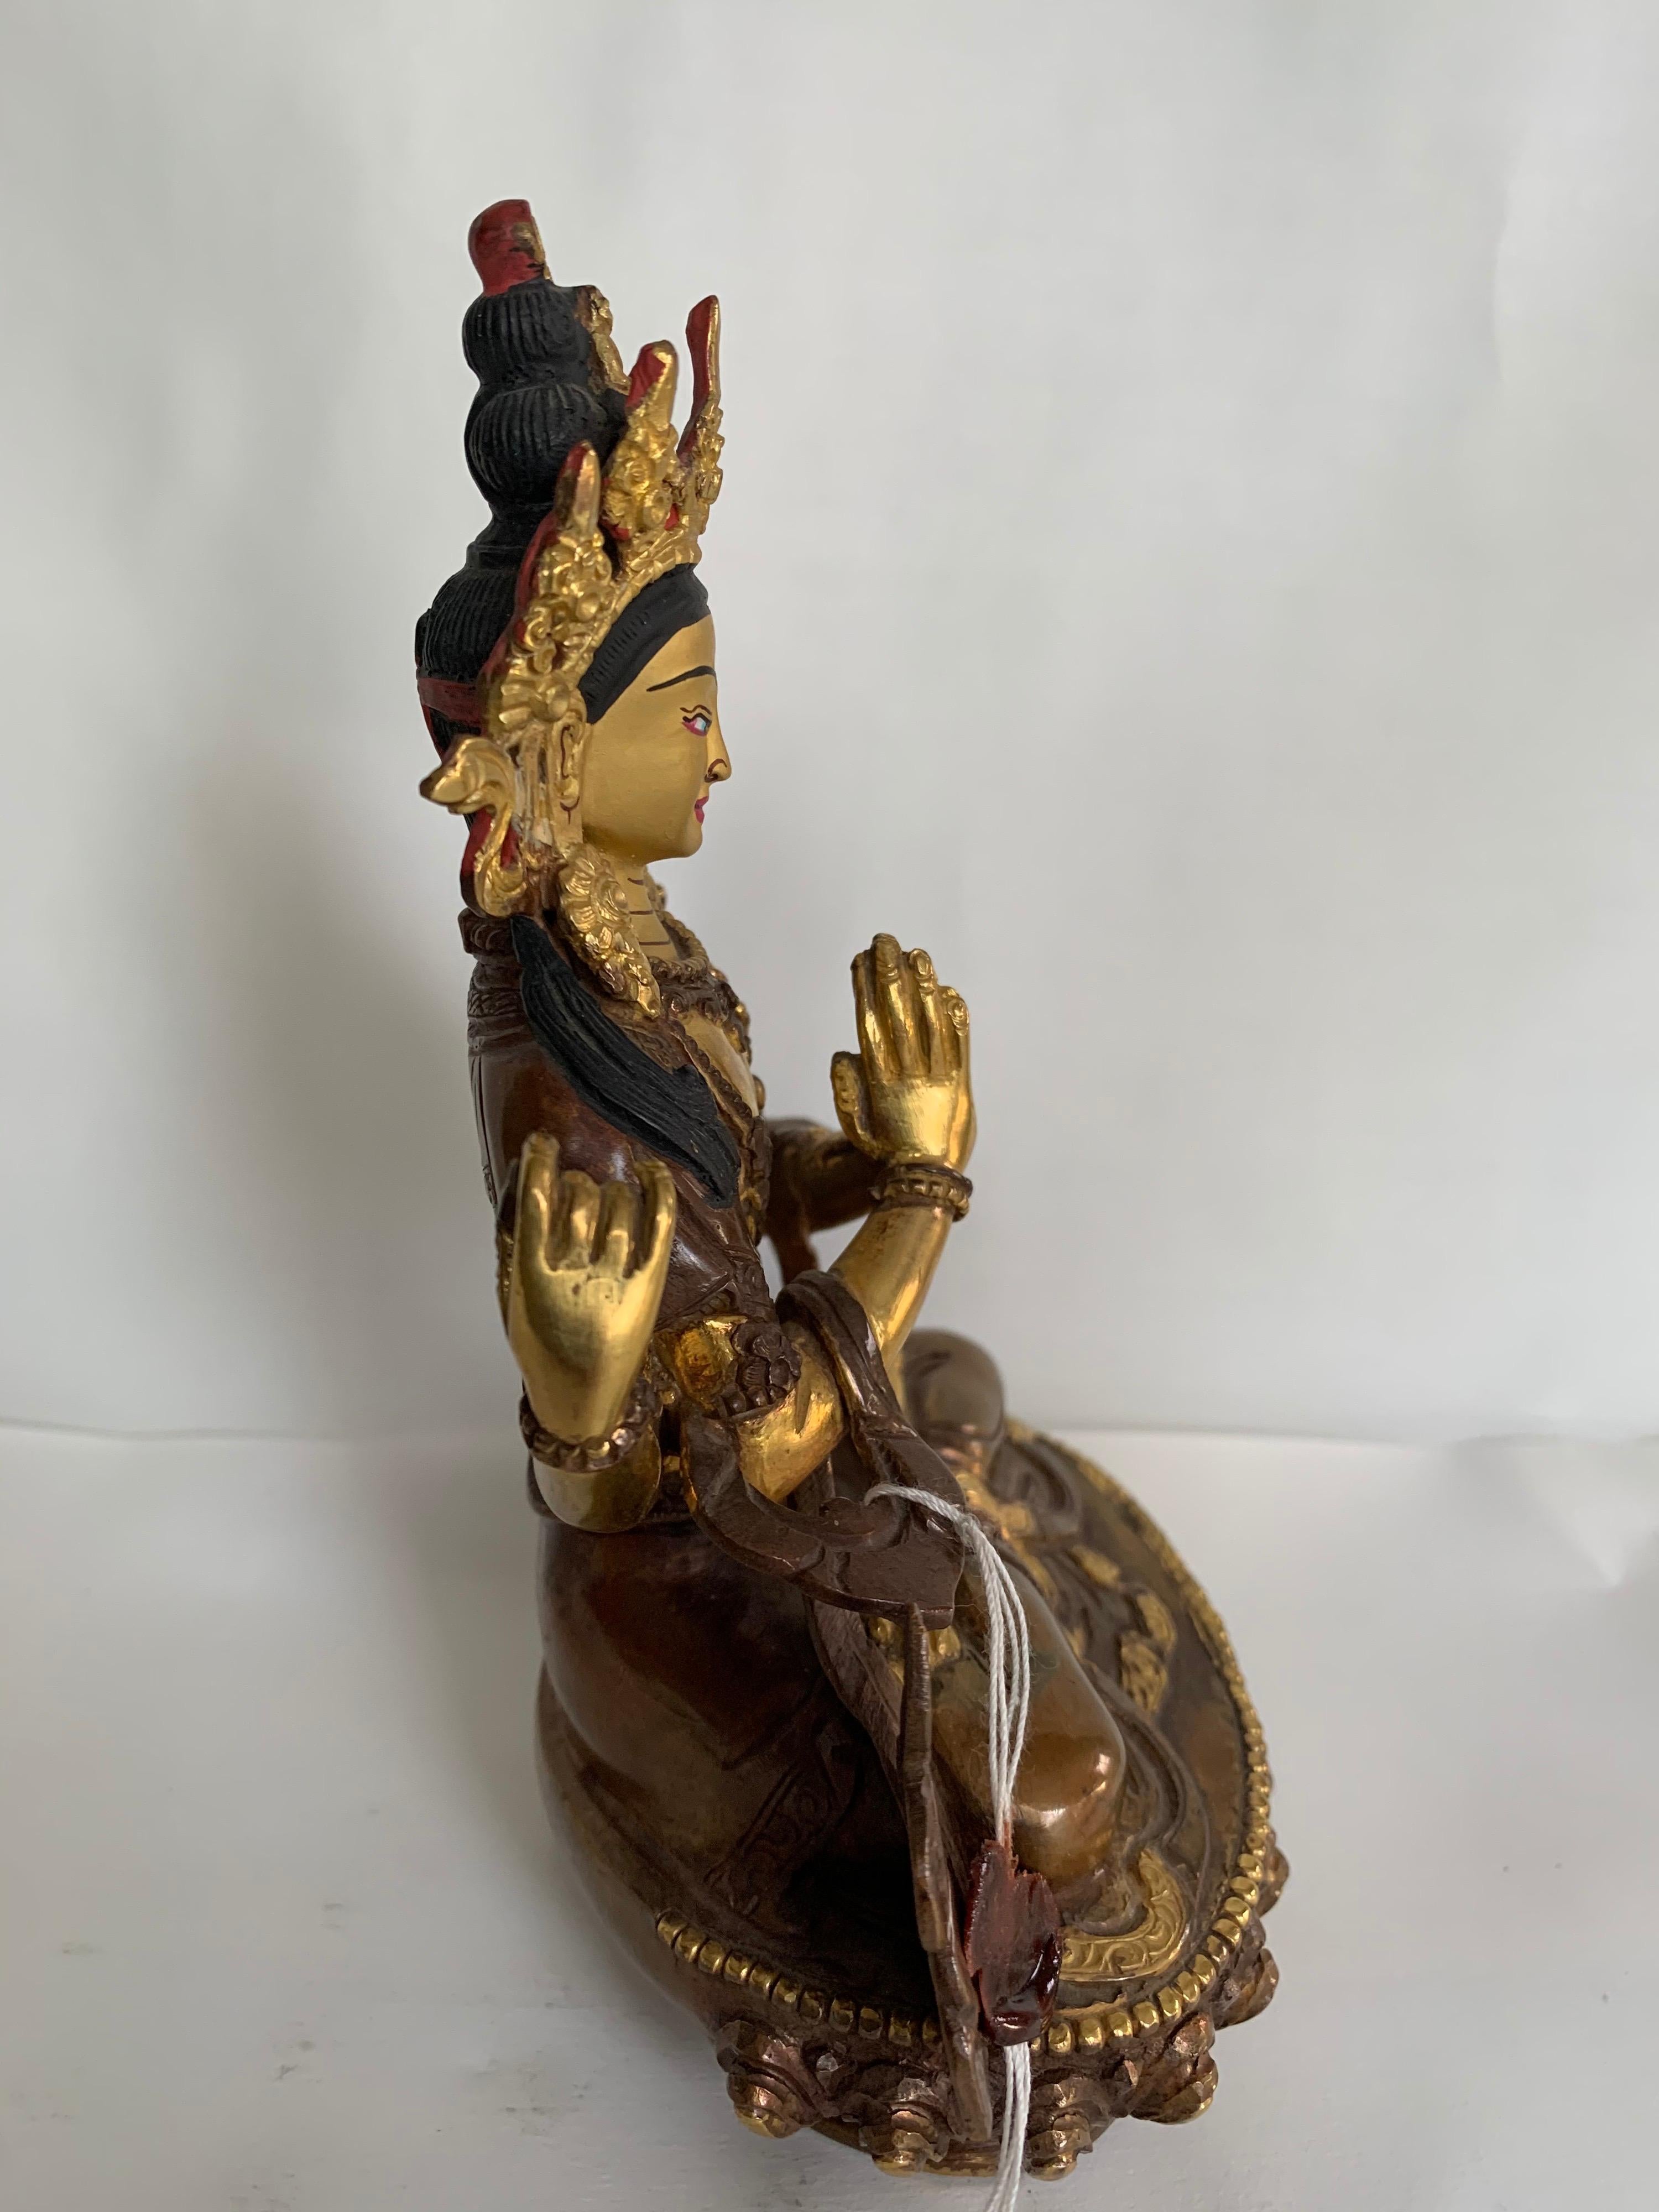 Chengrishi Statue 6 Inch with 24K Gold Handcrafted by Lost Wax Process - Gray Figurative Sculpture by Unknown